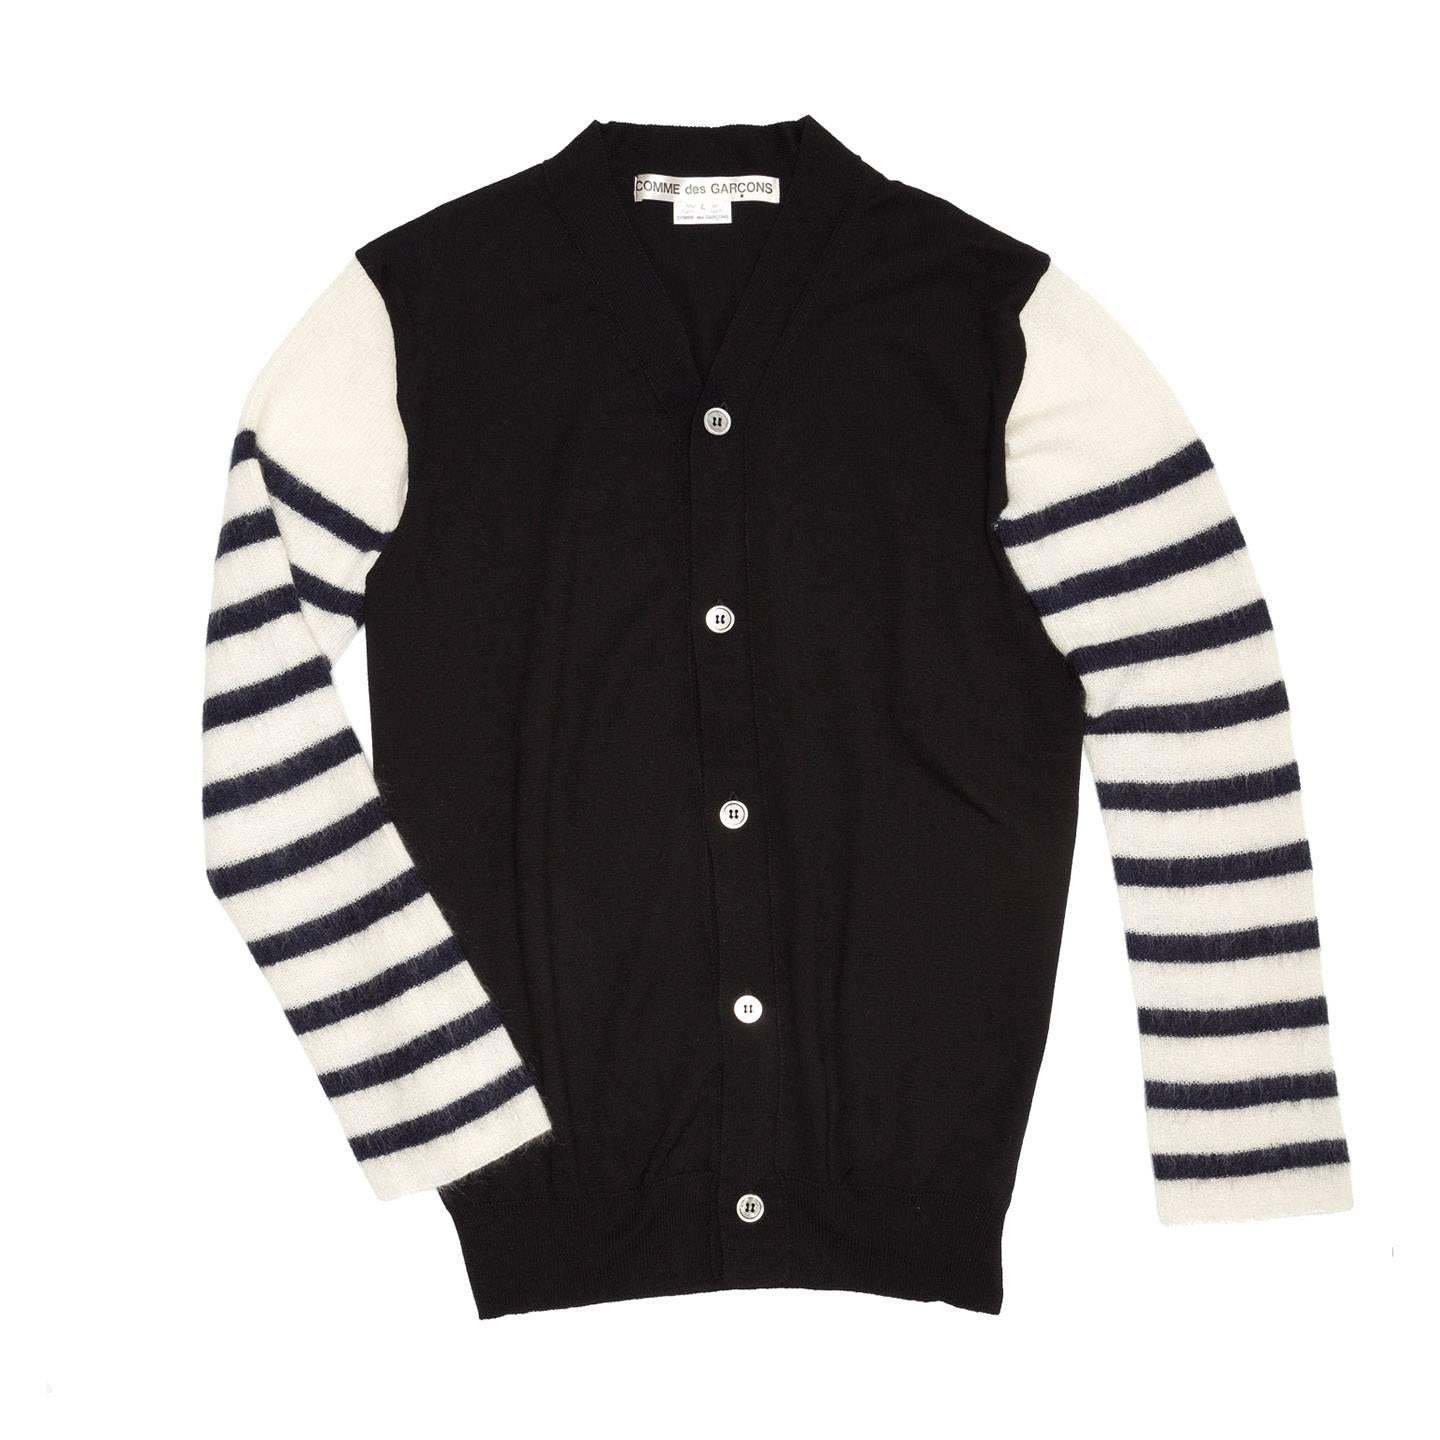 Black wool cardigan with ivory and navy blue striped sleeves which are attached to the body only at shoulder top, leaving the underarm open. The front fastens with mother of pearl round buttons leaving the V-neck very high. Japanese size Large, fits